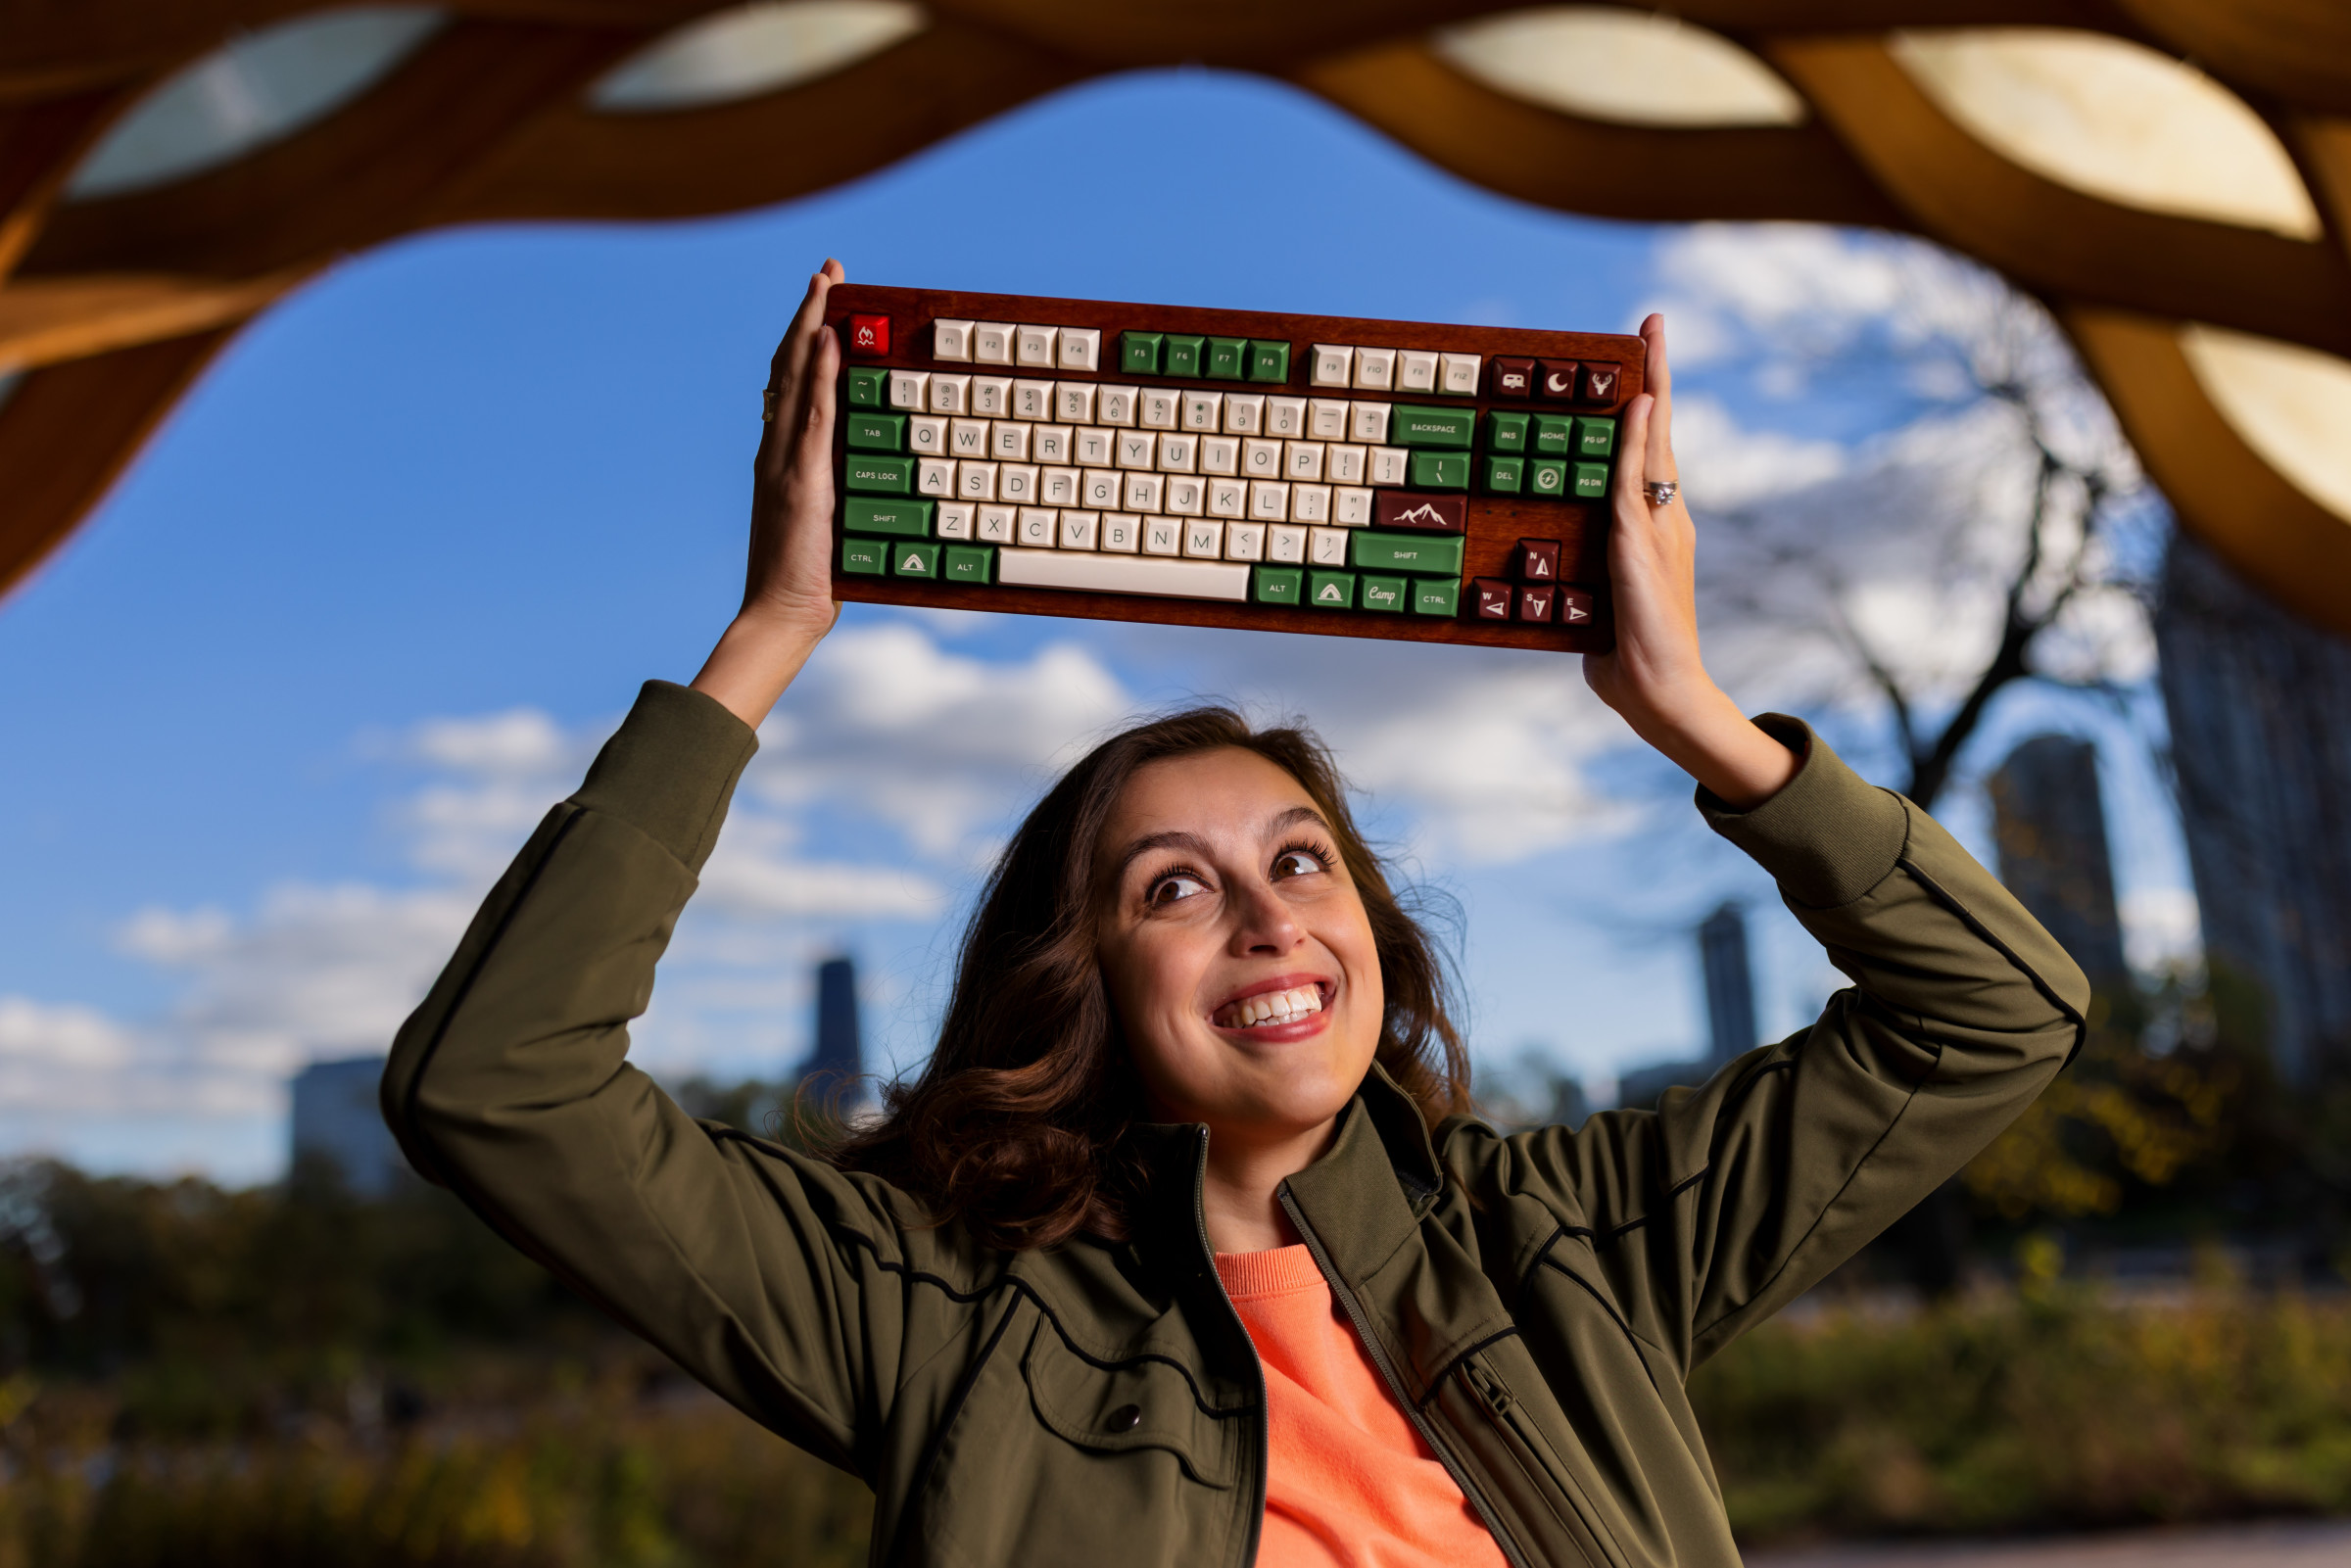 Author Cassidy smiling and holding up a mechanical keyboard she built